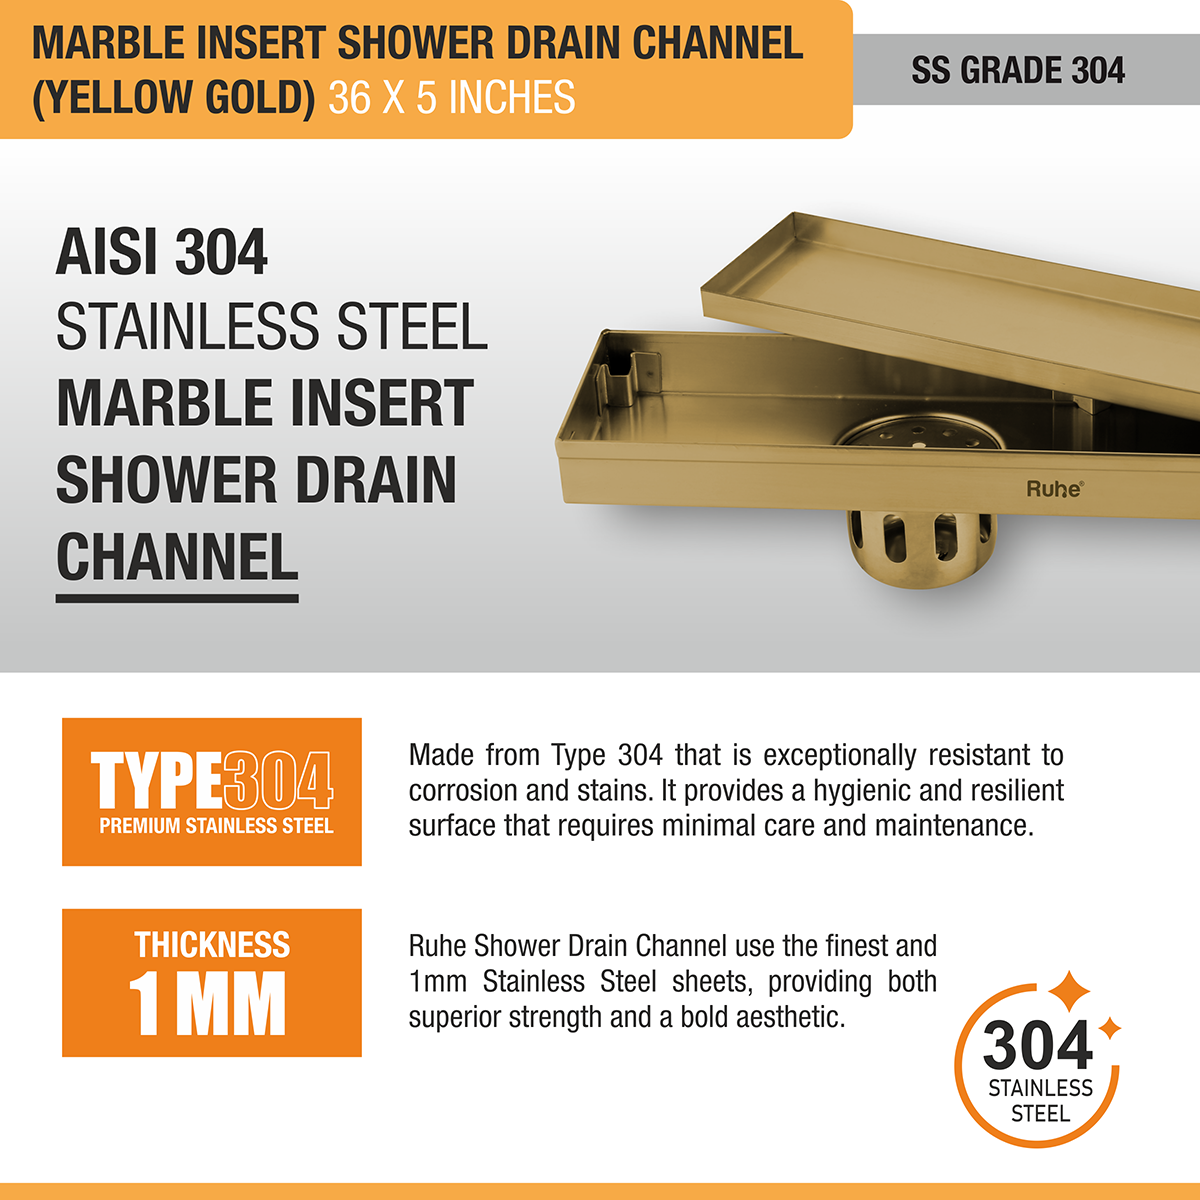 Marble Insert Shower Drain Channel (36 x 5 Inches) YELLOW GOLD PVD Coated stainless steel